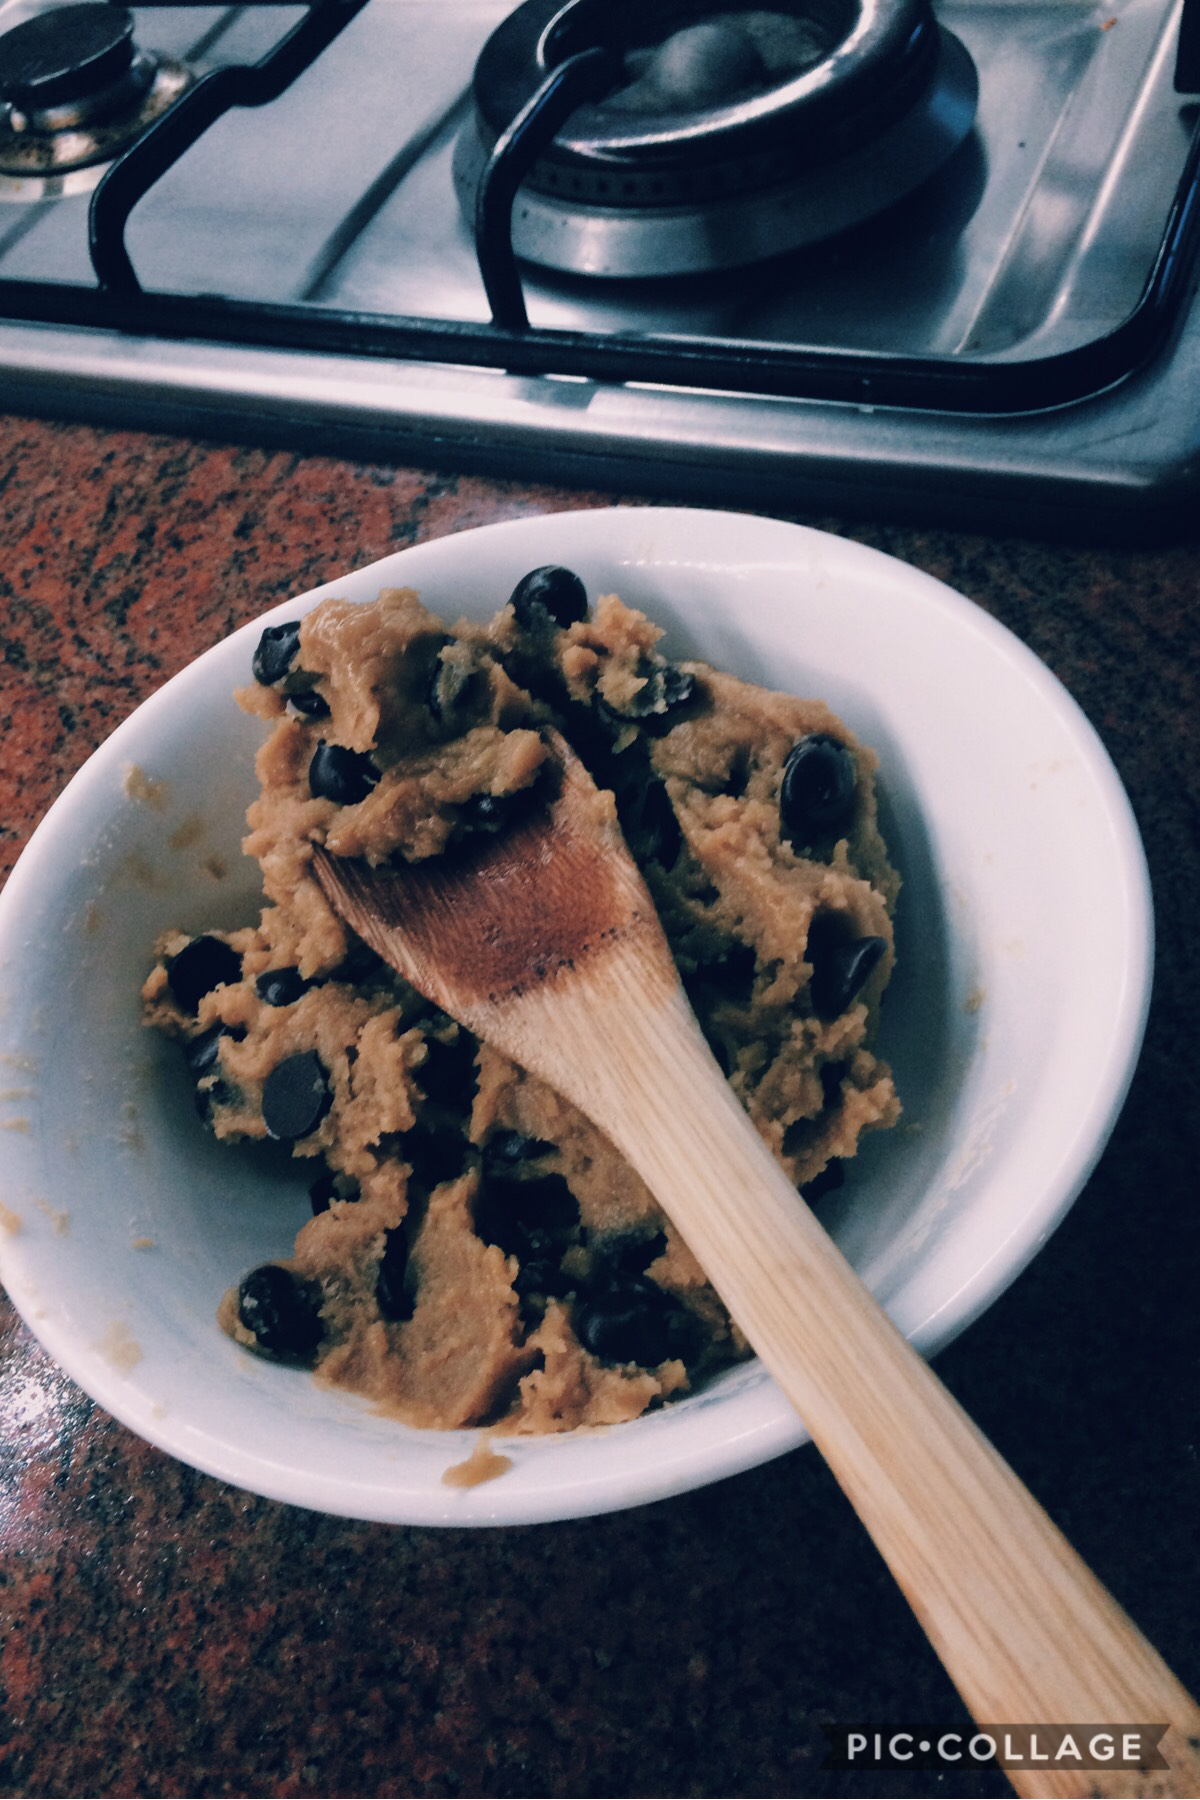 #22. Woww I’ve been really inactive. Sorry about that 🤷‍♀️ I made this cookie dough a while ago. Does anyone else like cookie dough? 